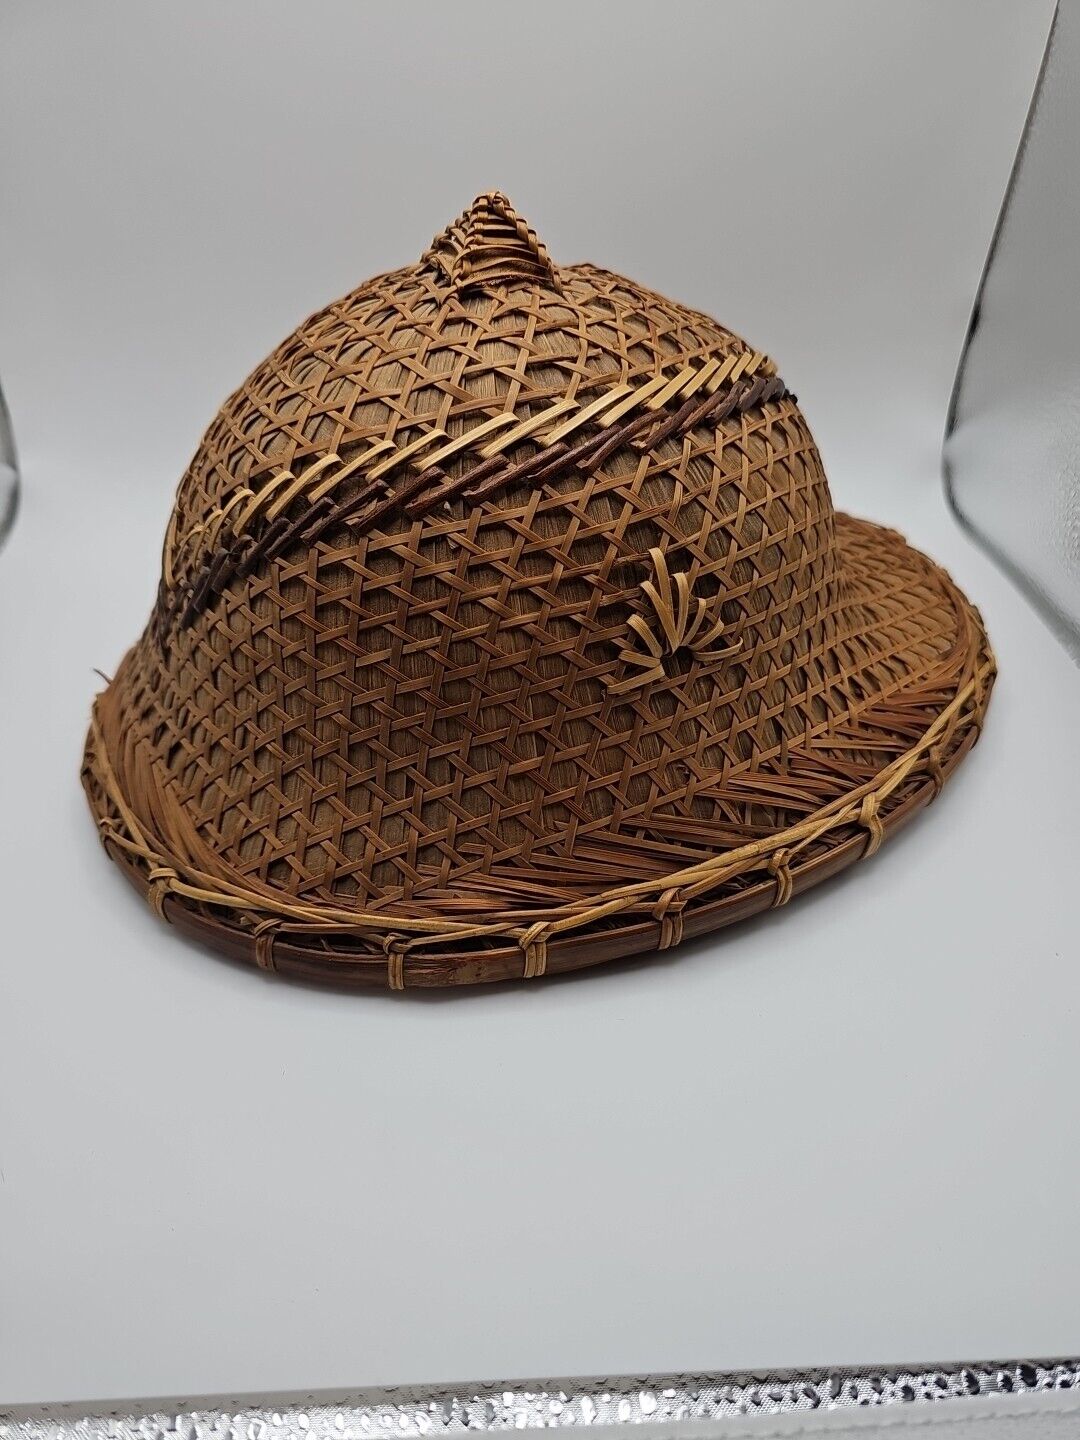 Vintage Antique Asian Woven Wicker Chinese Straw Bamboo Hat Amazing Handwork